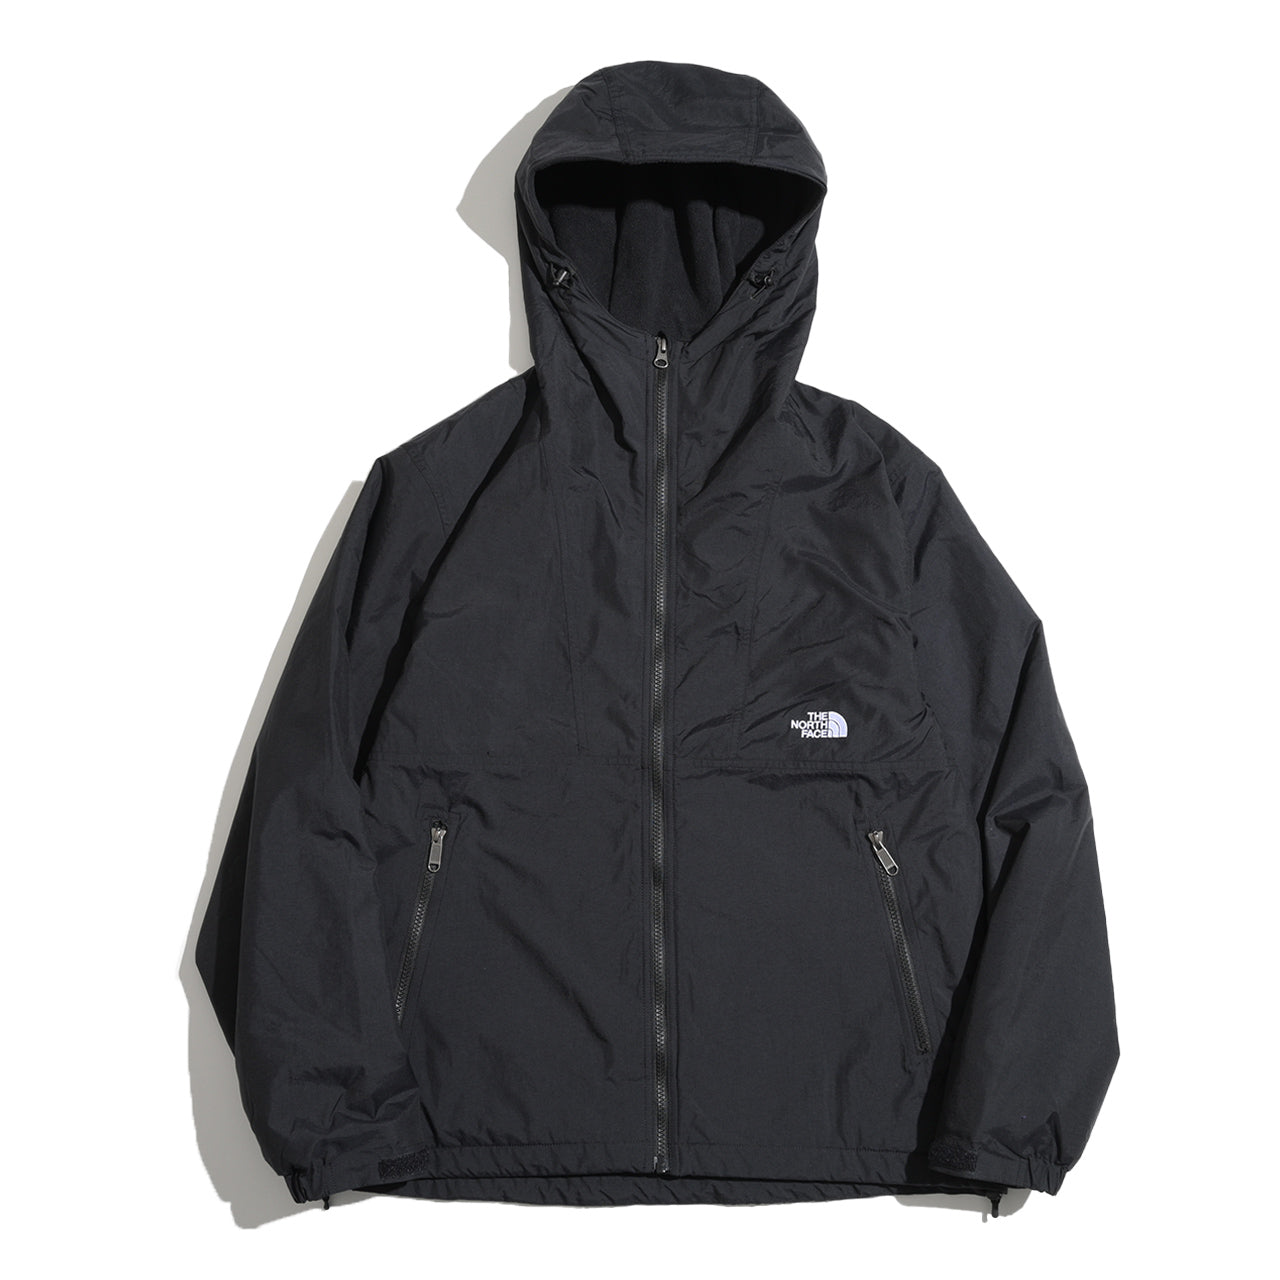 【SALE！20%OFF】THE NORTH FACE ノースフェイス コンパクト ノマド ジャケット Compact Nomad Jacket  NP72330【送料無料】